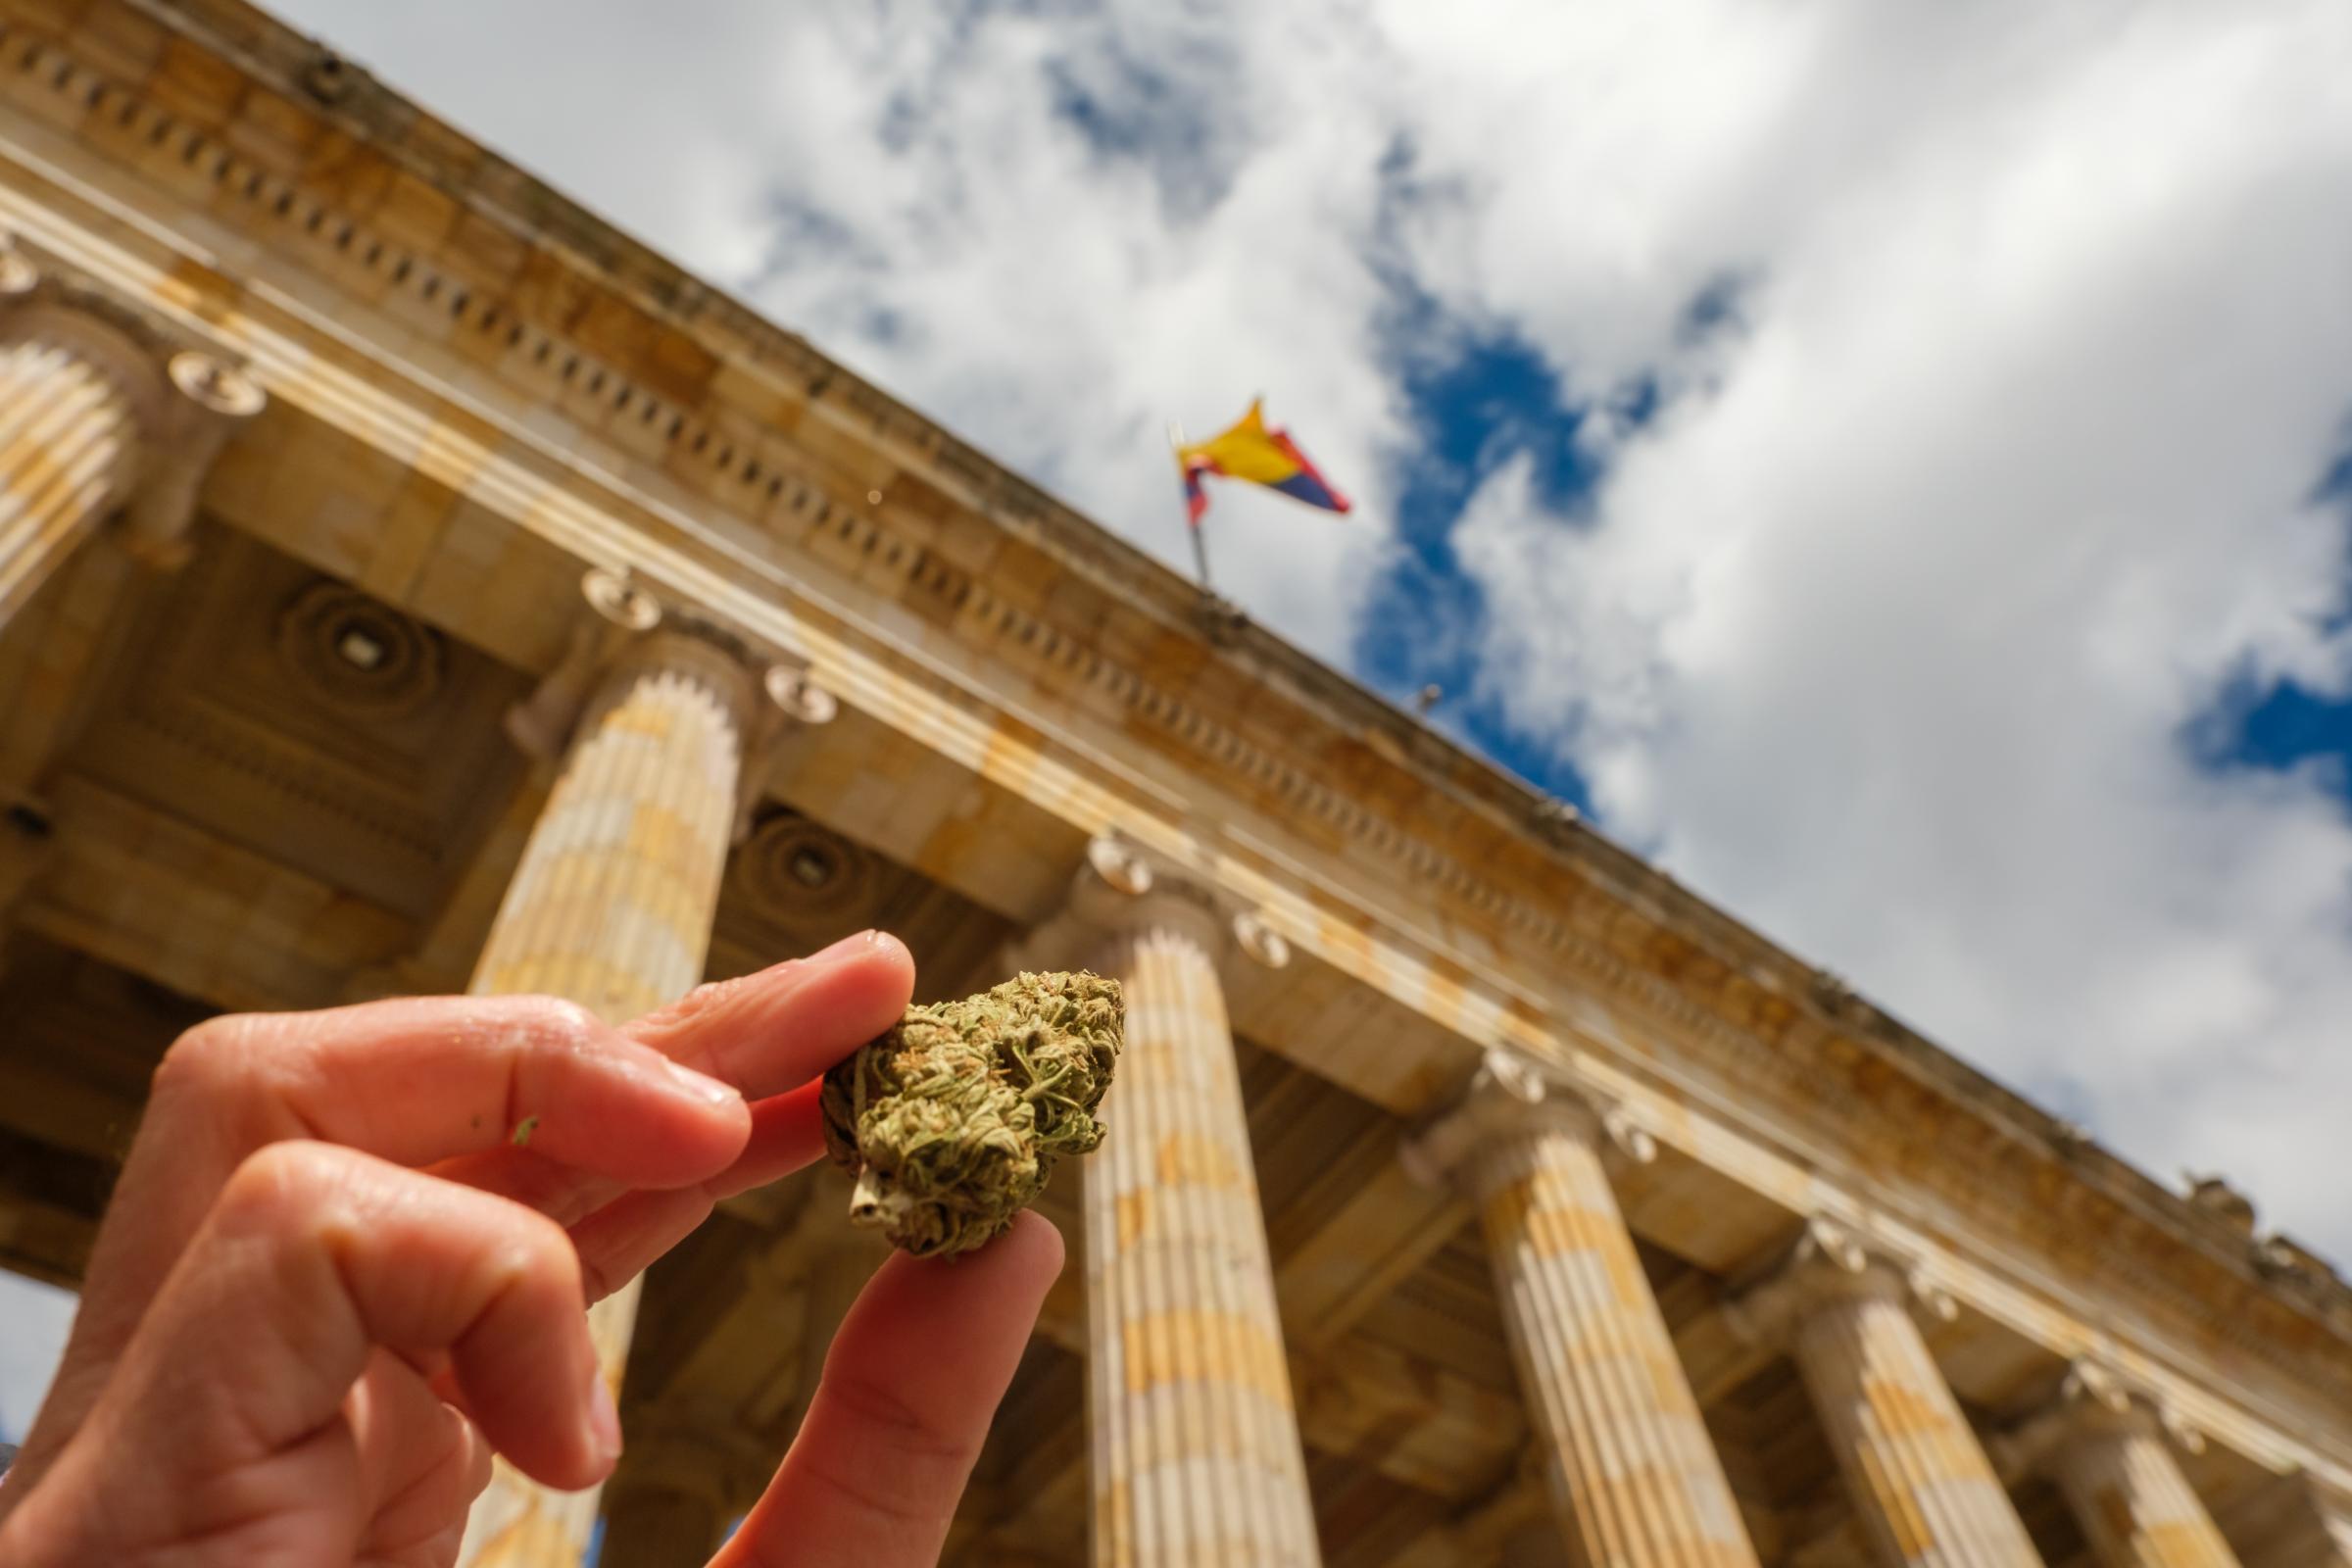 Marijuana Activists and Indigenous communities gather in front of the Colombian Congress waiting for the aprproval (or not) of the constitutional...